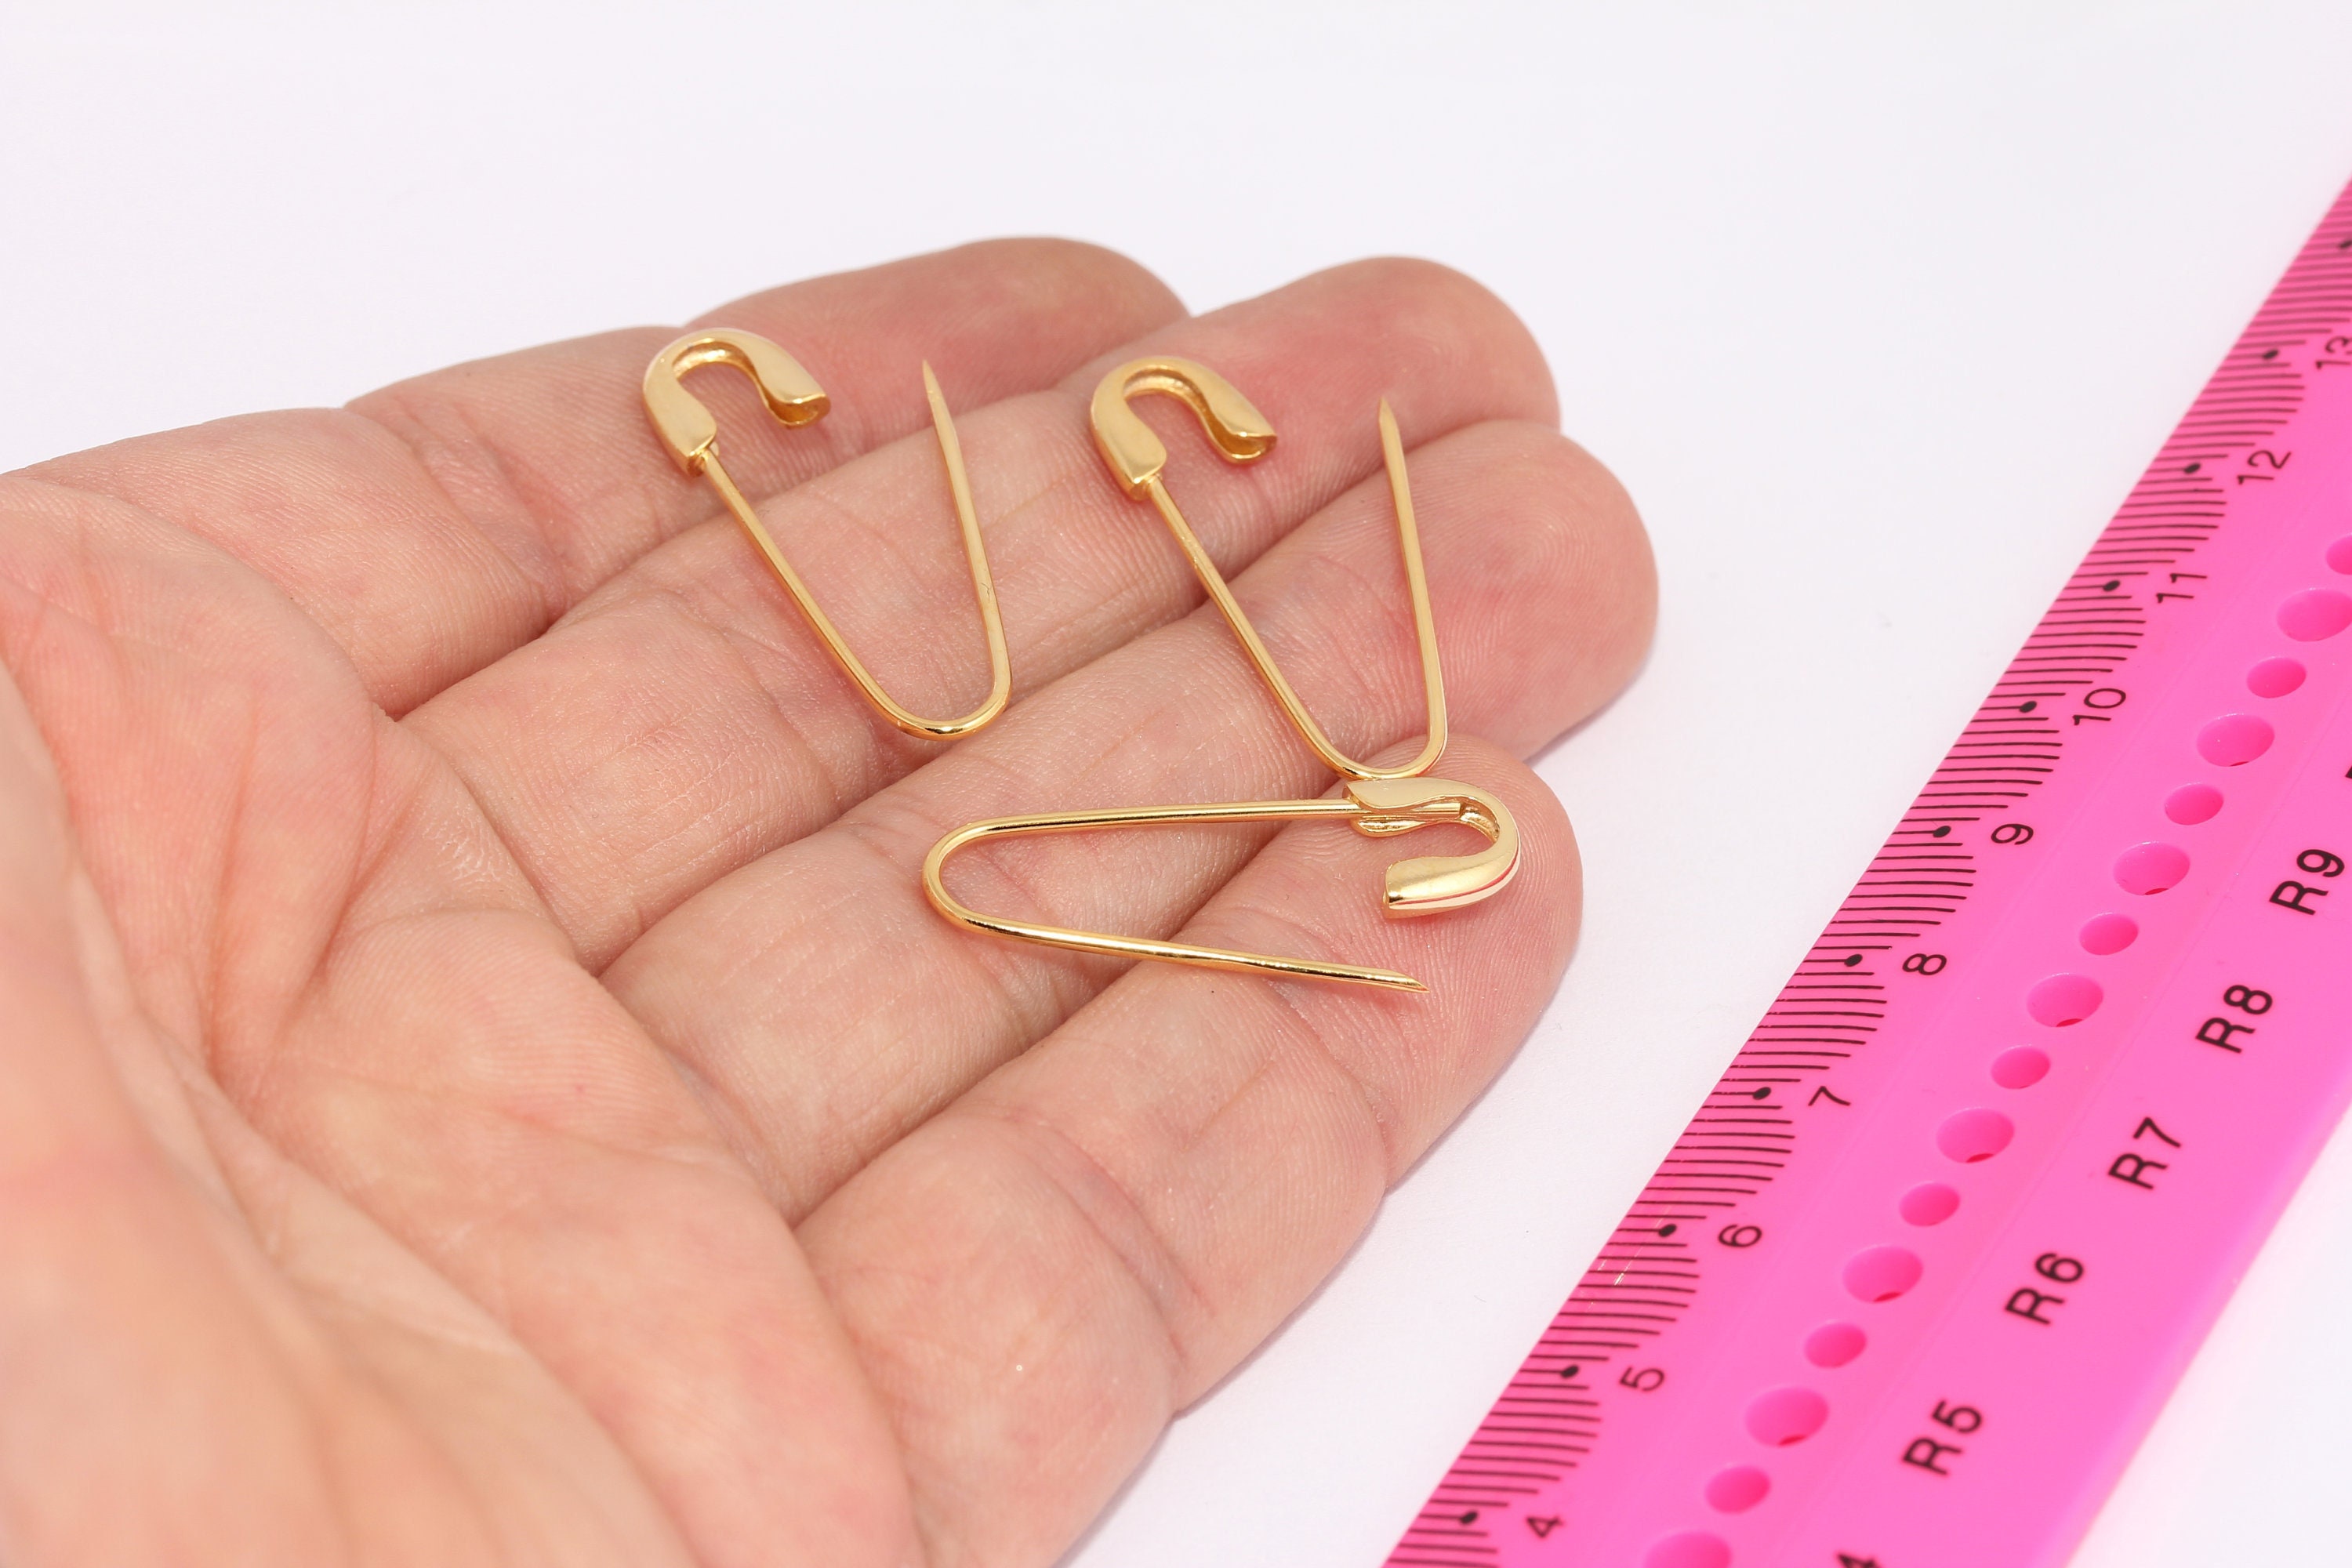 Darice Coiless Safety Pins- 1.5 Inch Gold 25 Per Package - Coiless